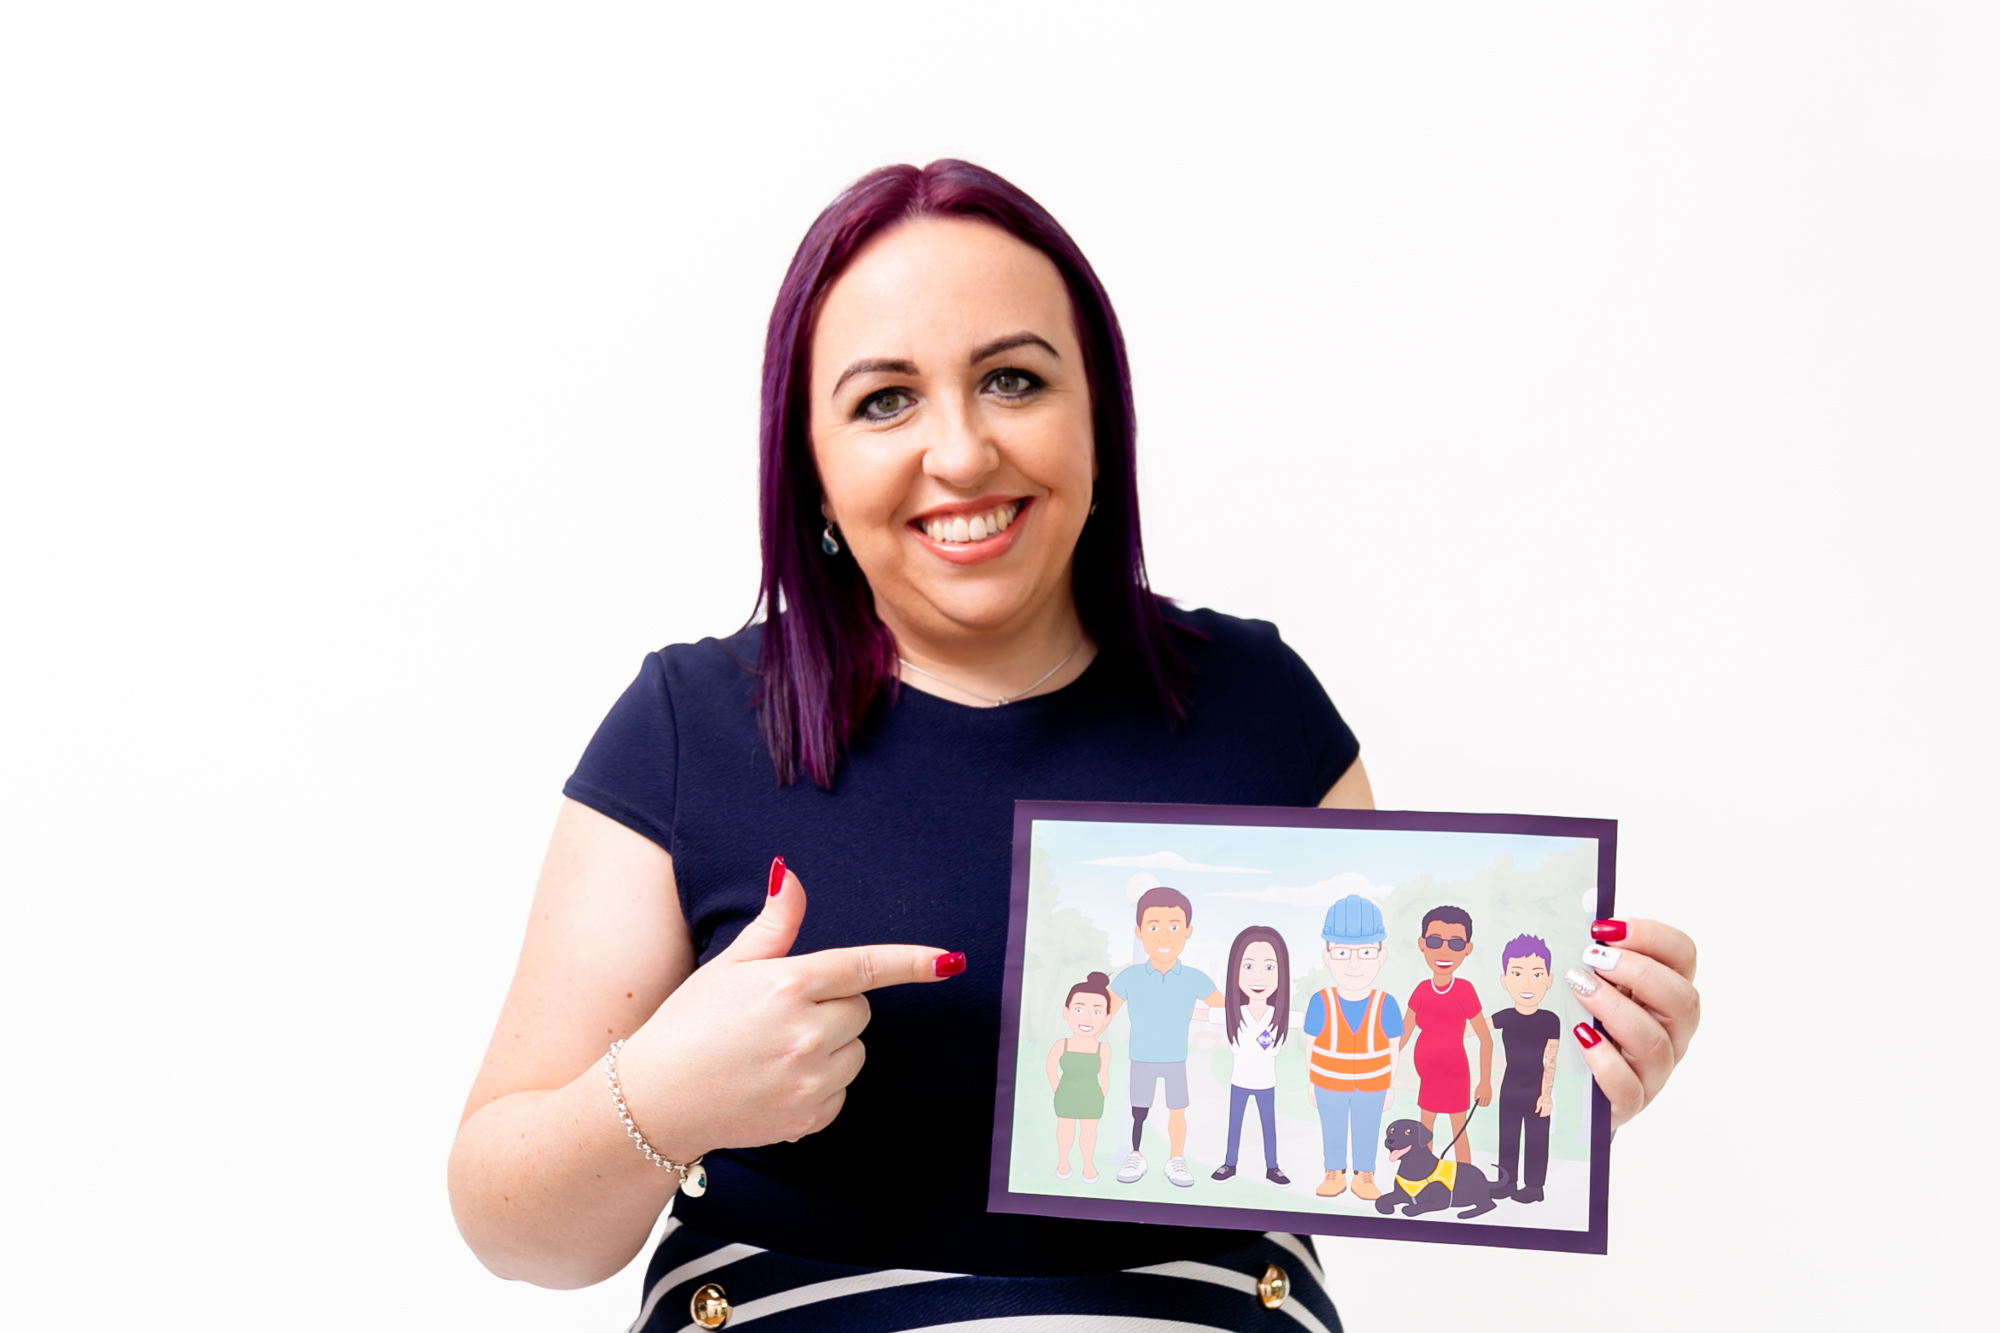 Jodie Greer smiling holding picture of disabled people. Wearing purple top and stripey purple skirt